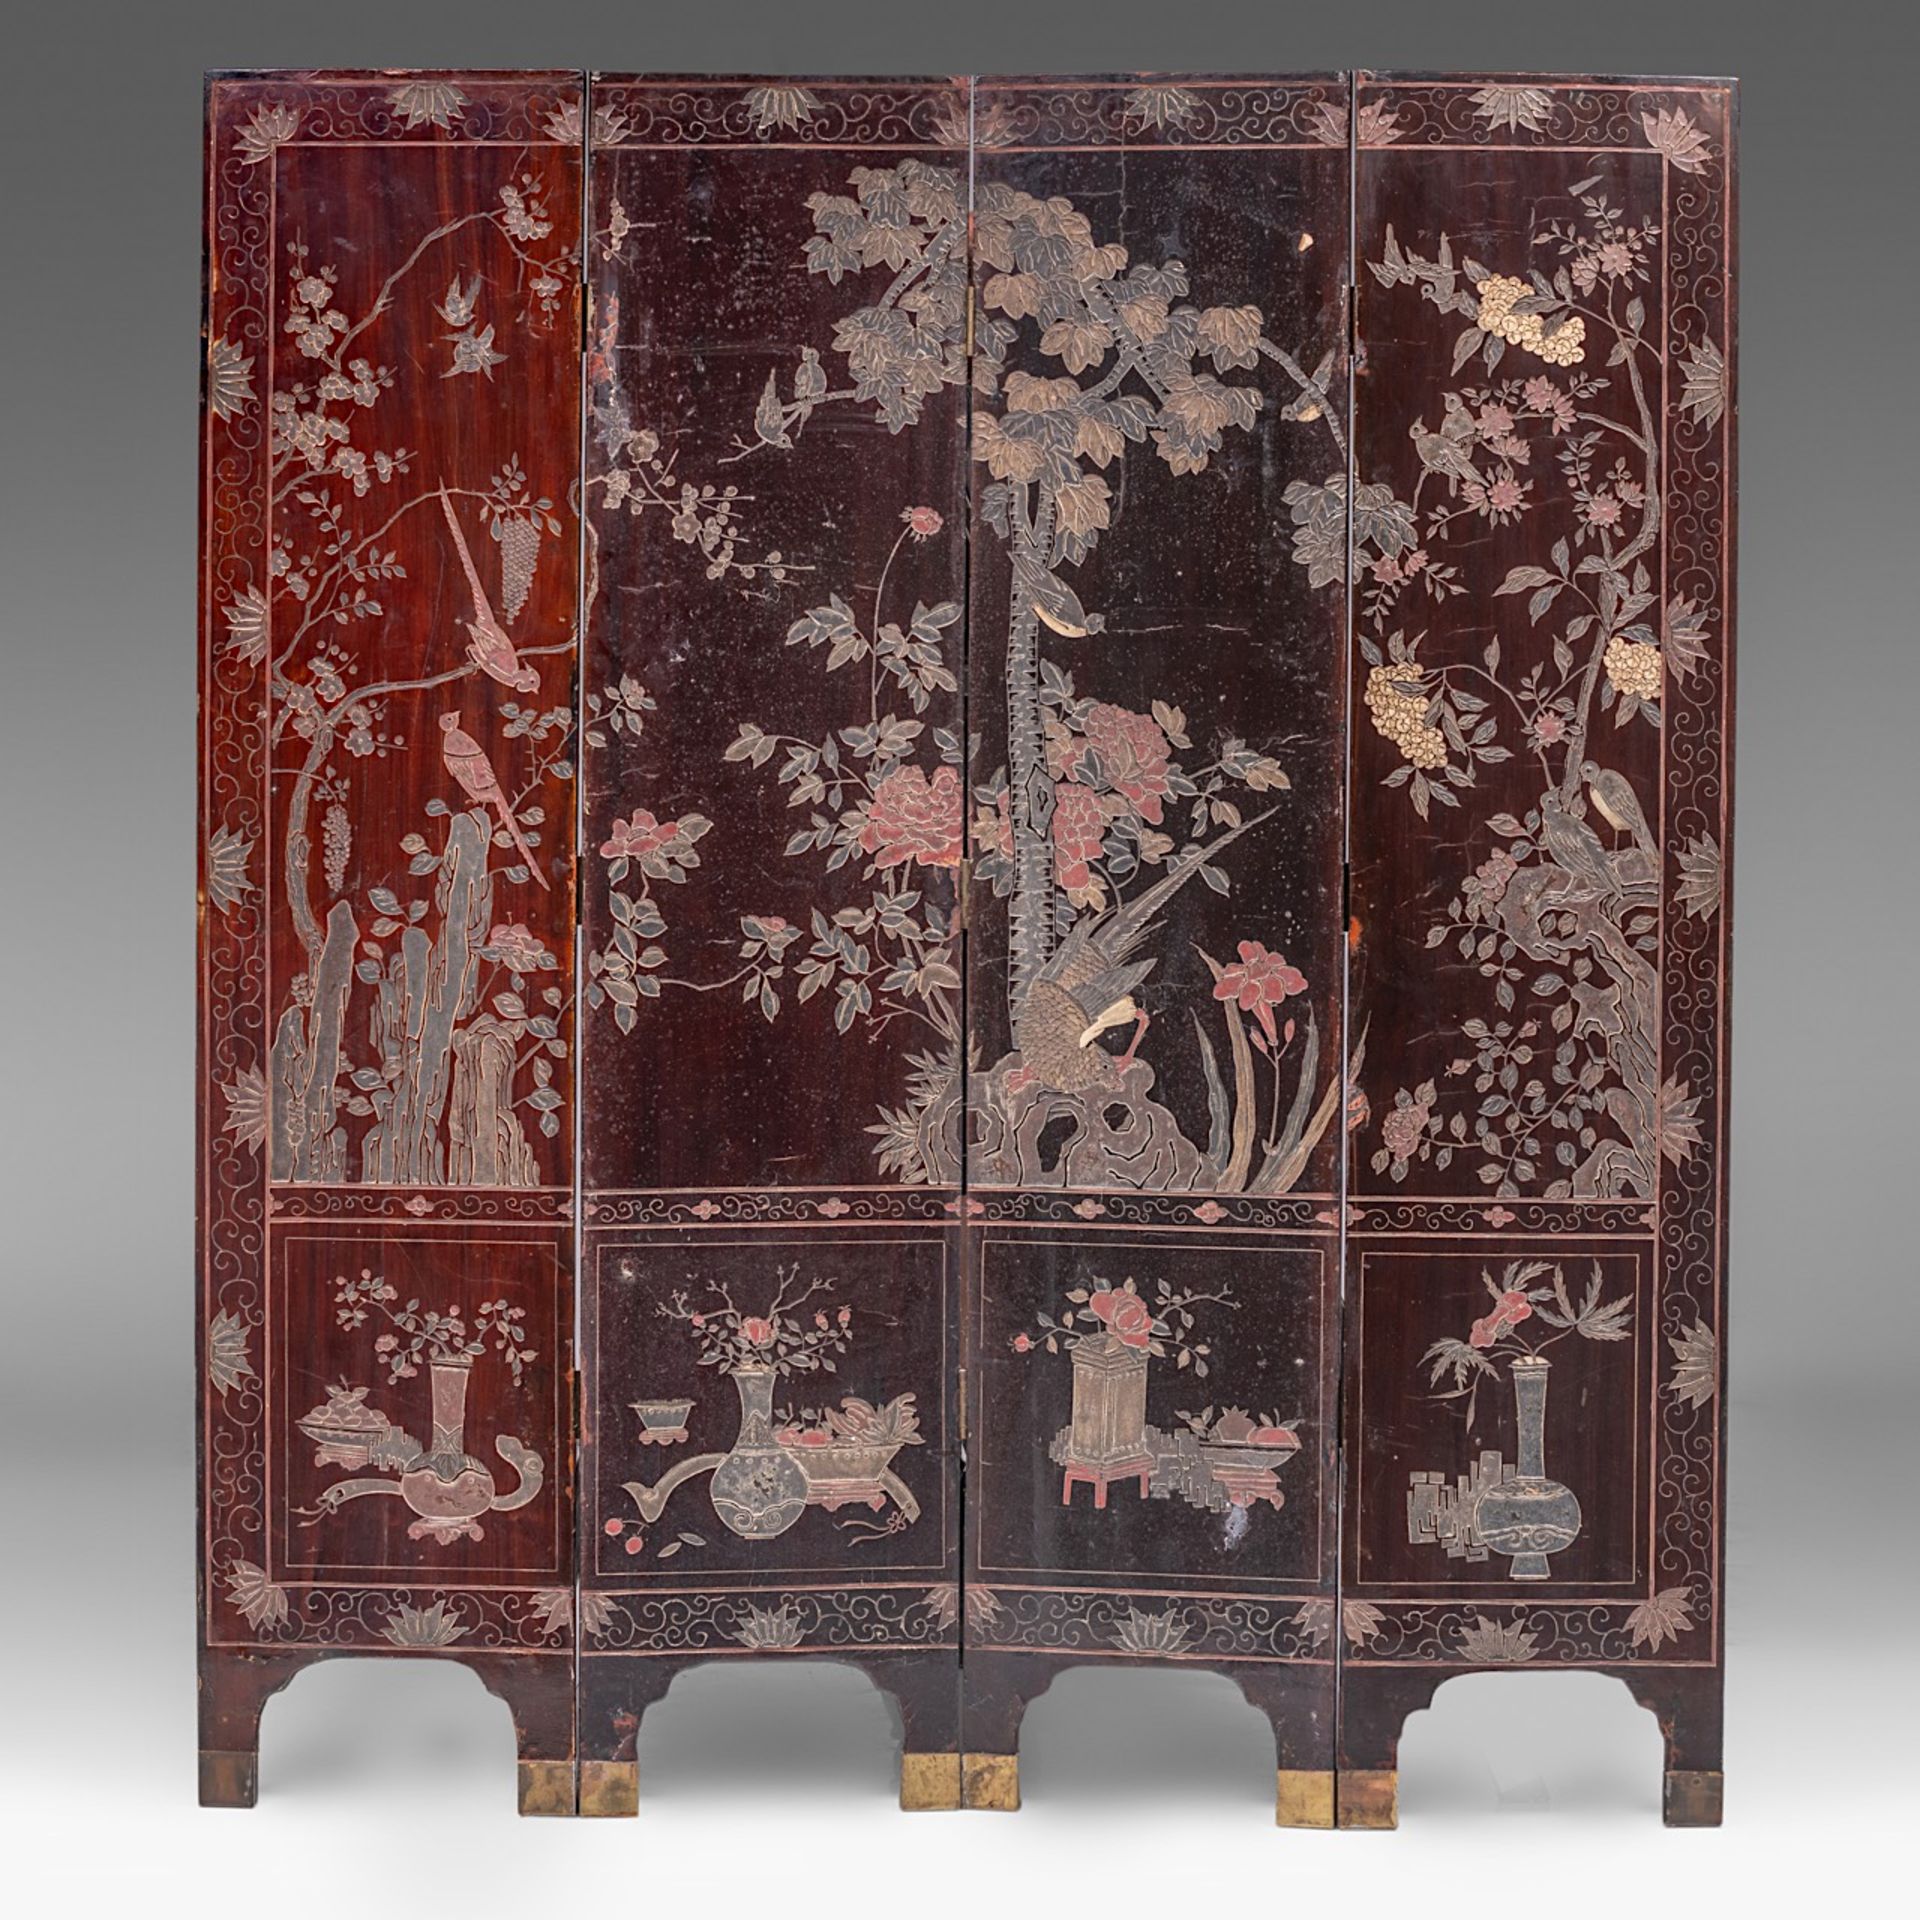 A Chinese coromandel lacquered four-panel chamber screen, late 18thC/19thC, H 162 - W 35,5 (each pan - Image 2 of 10